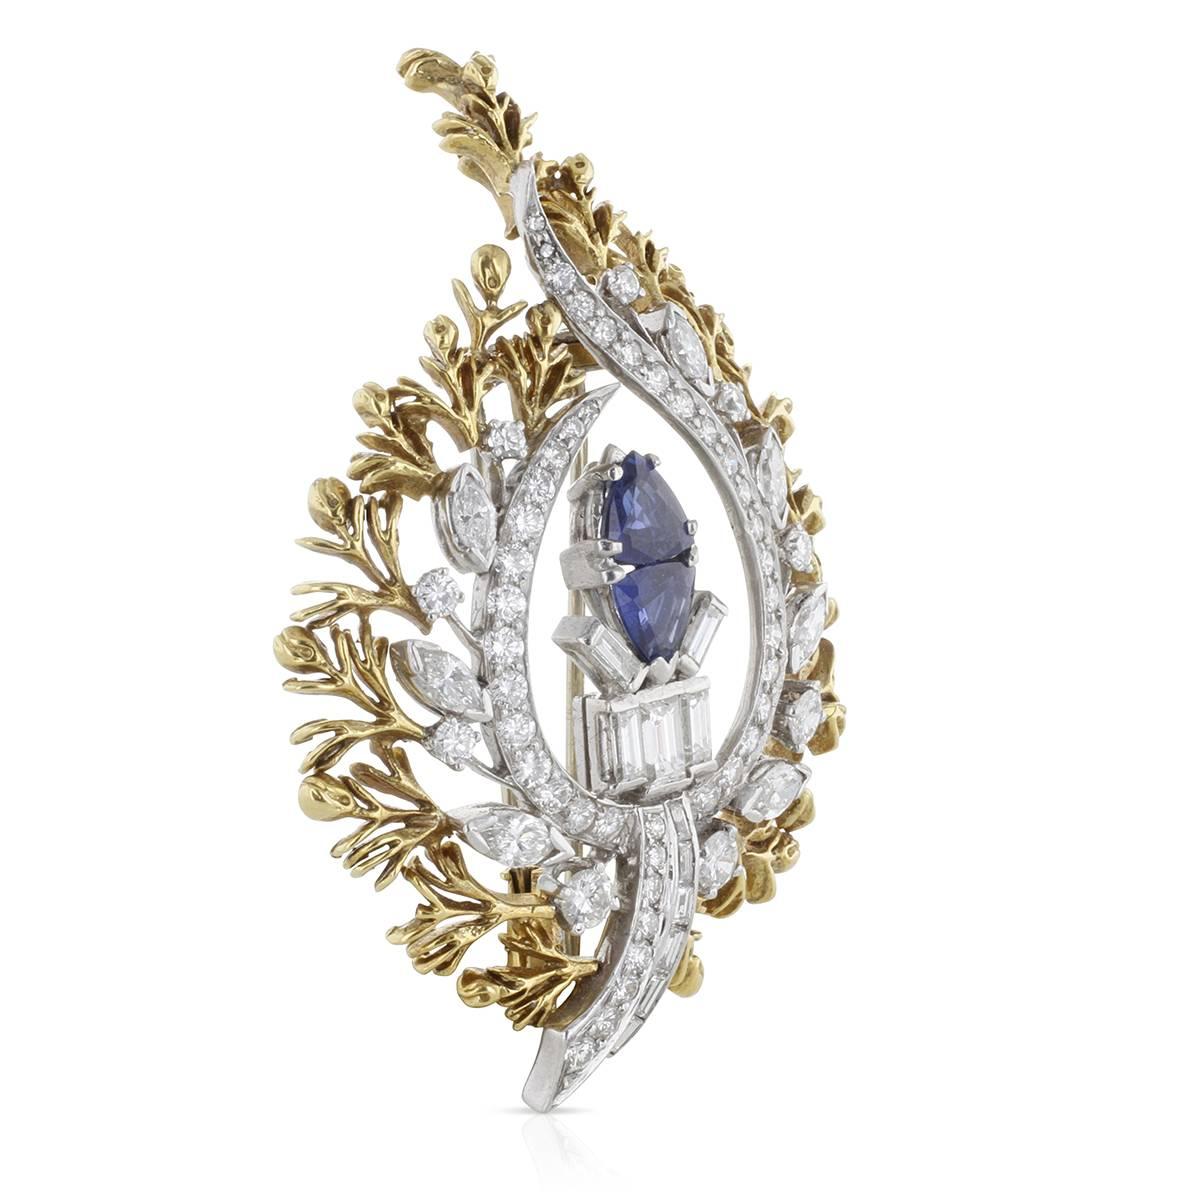 This vintage style dazzler centers two vivid trilliant-shaped sapphires and sizzles with 3.80 carats in diamonds. It's beautifully handcrafted in platinum and yellow gold and shaped in an elaborate leaf style fashion which was so popular back in the